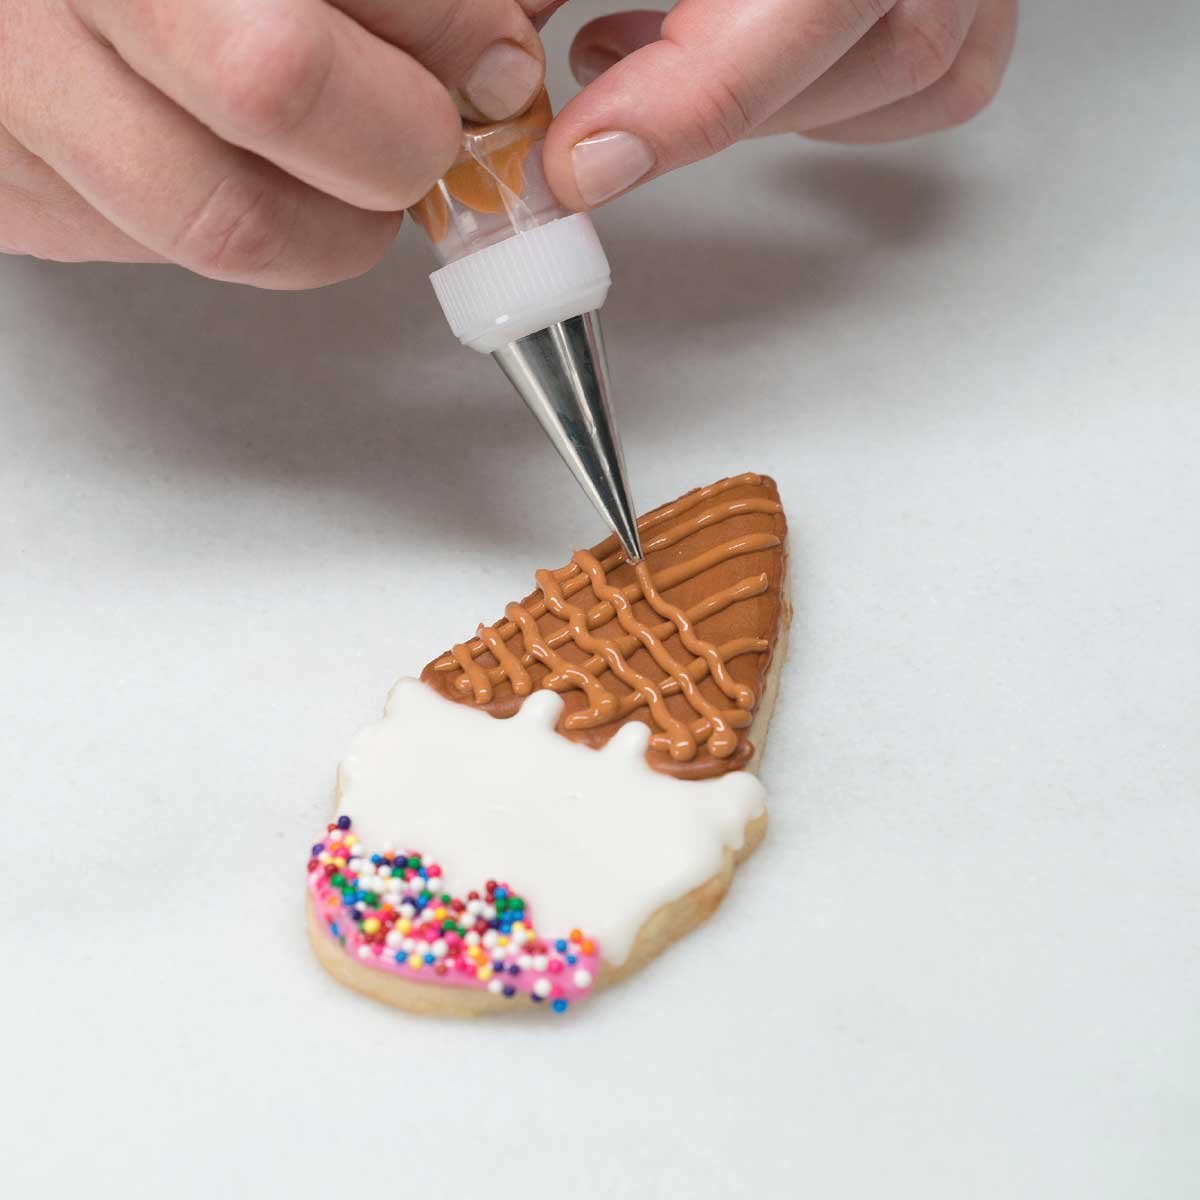 The Secret of Beautifully Decorated Cookies Is a Cheap Squeeze Bottle